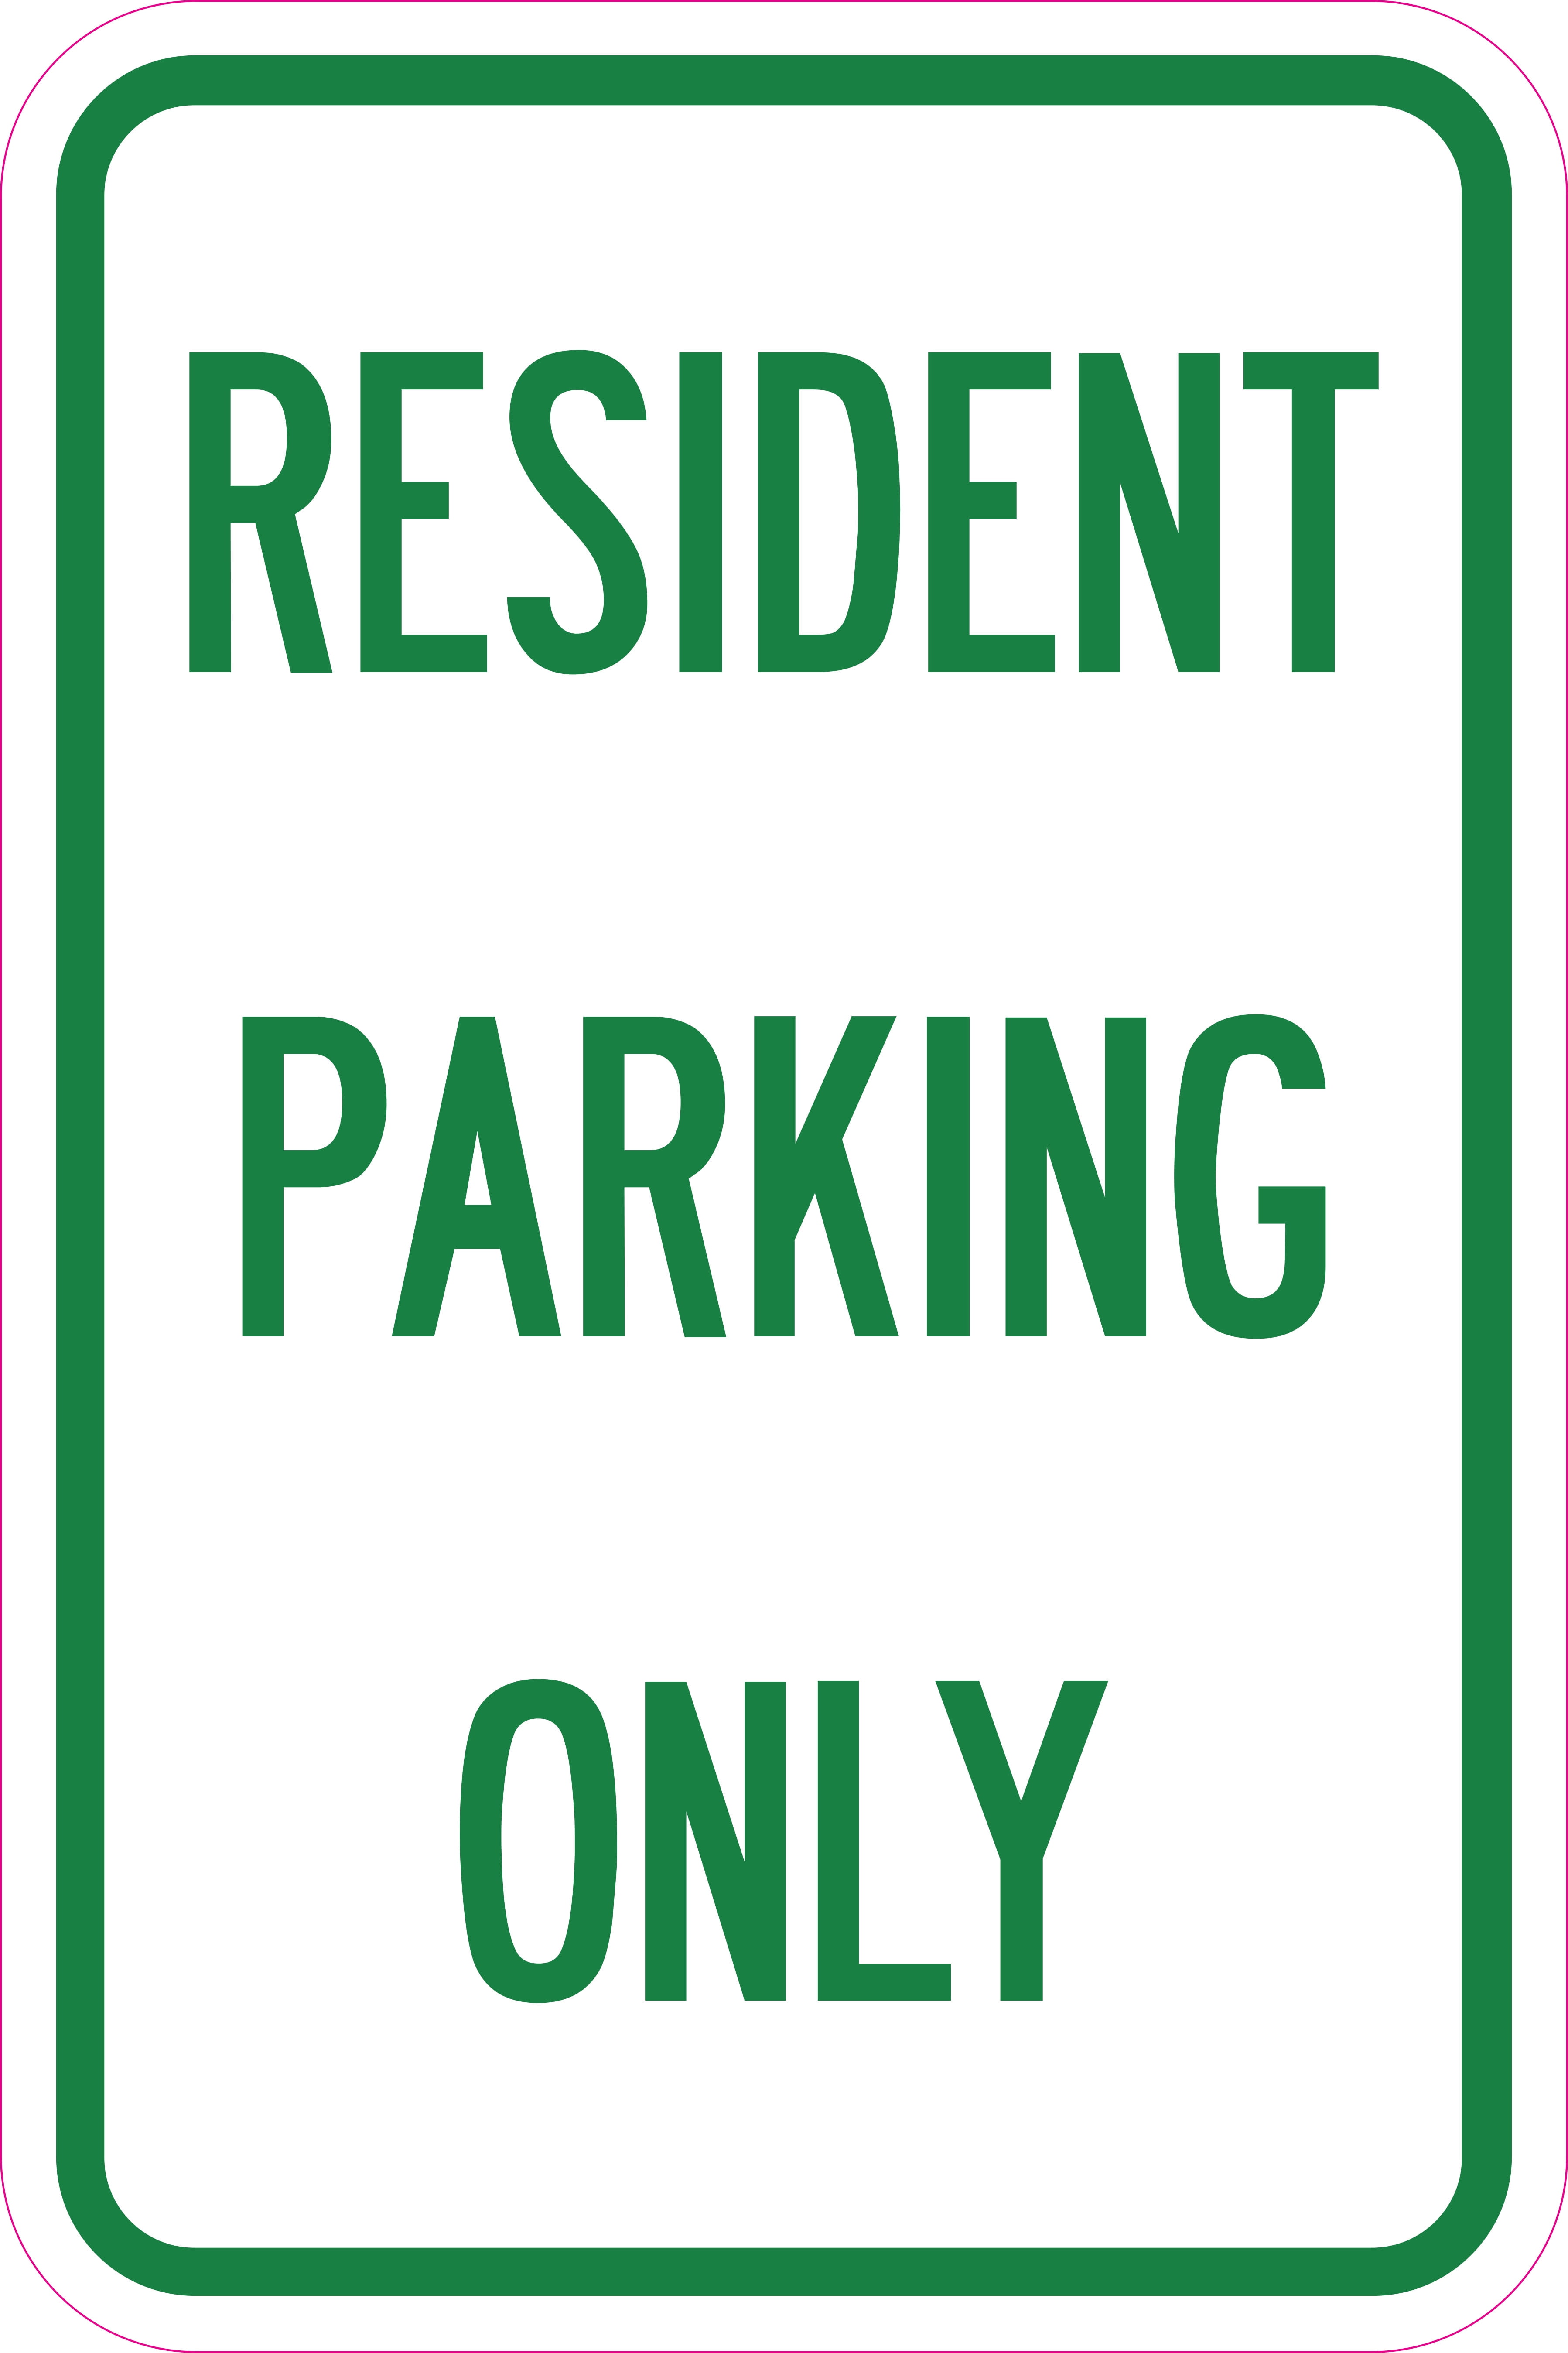 RESIDENT PARKING ONLY SIGN 12" X 18" ALUMINUM SIGN 